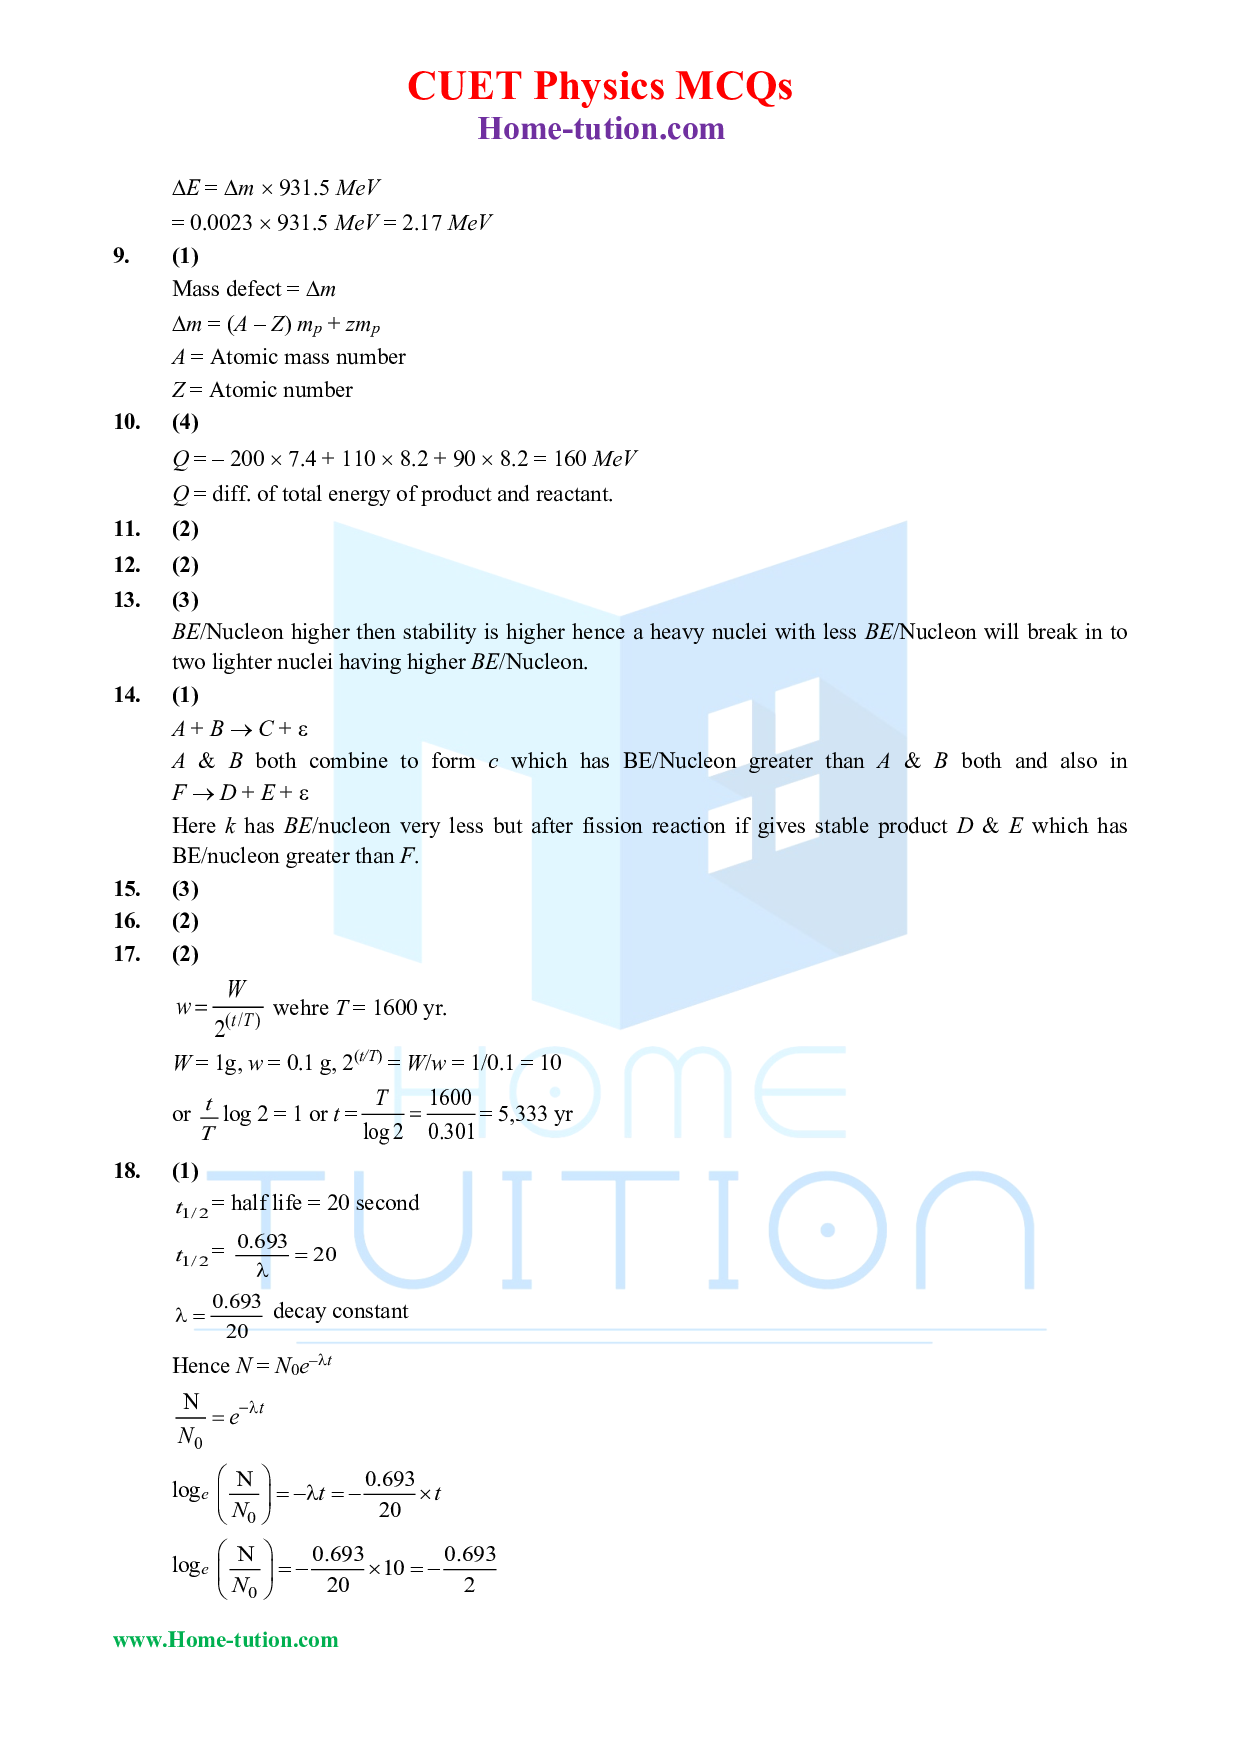 CUET MCQ Questions For Physics Chapter-13 Nuclei